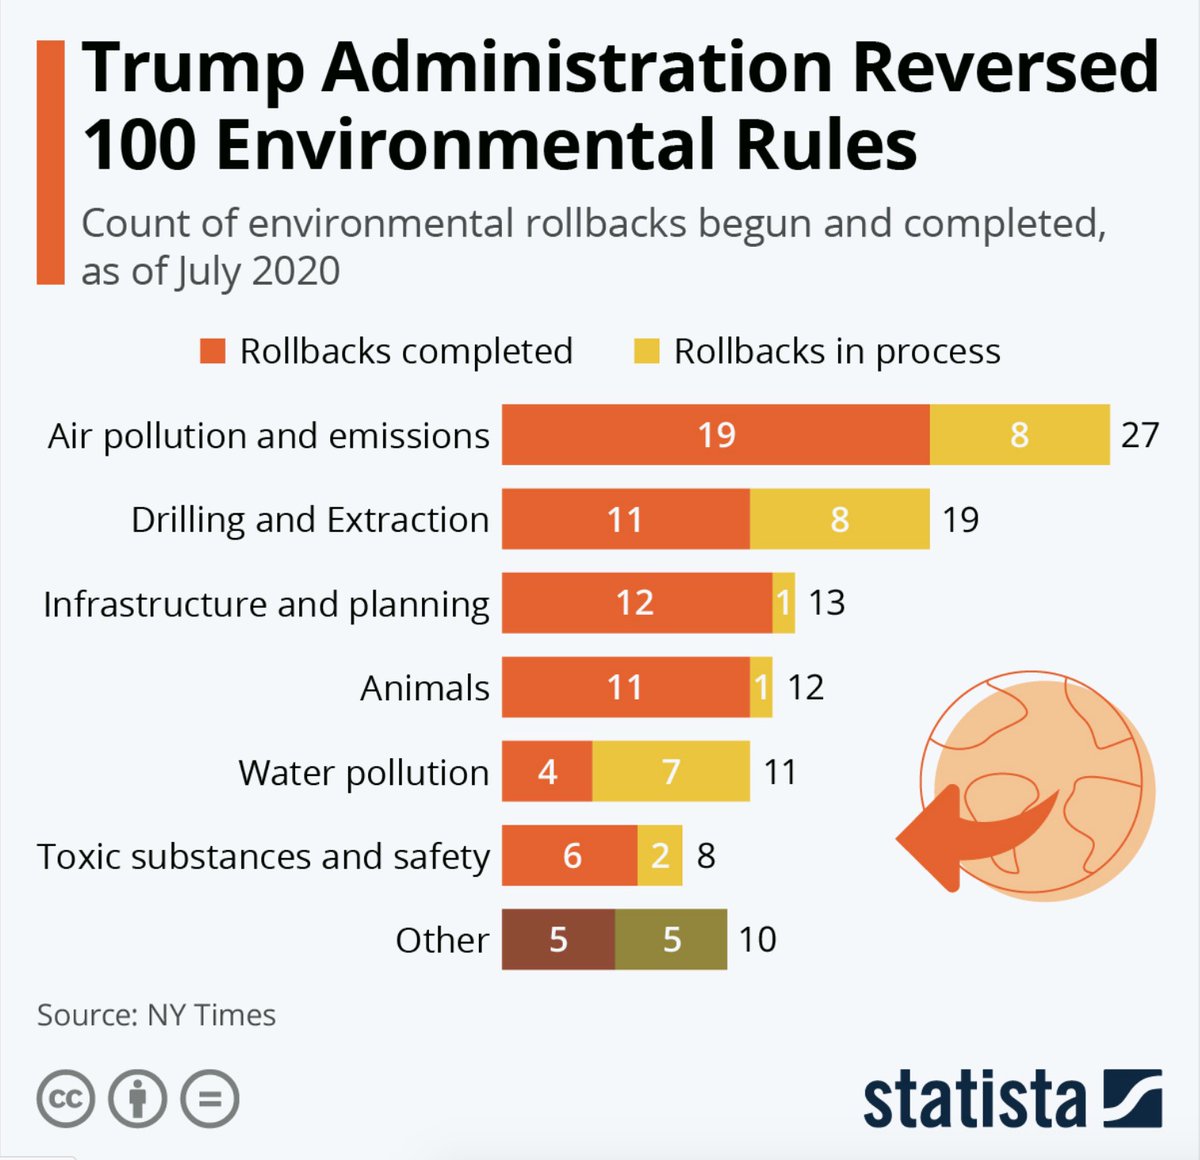 The truth? The Trump administration has or is in the process of rolling back over 100 pieces of legislation that protect the "clean air, clean water, and resilient environment" the press release claims to have protected. Source:  https://www.statista.com/chart/18268/environmental-regulations-trump-administration/